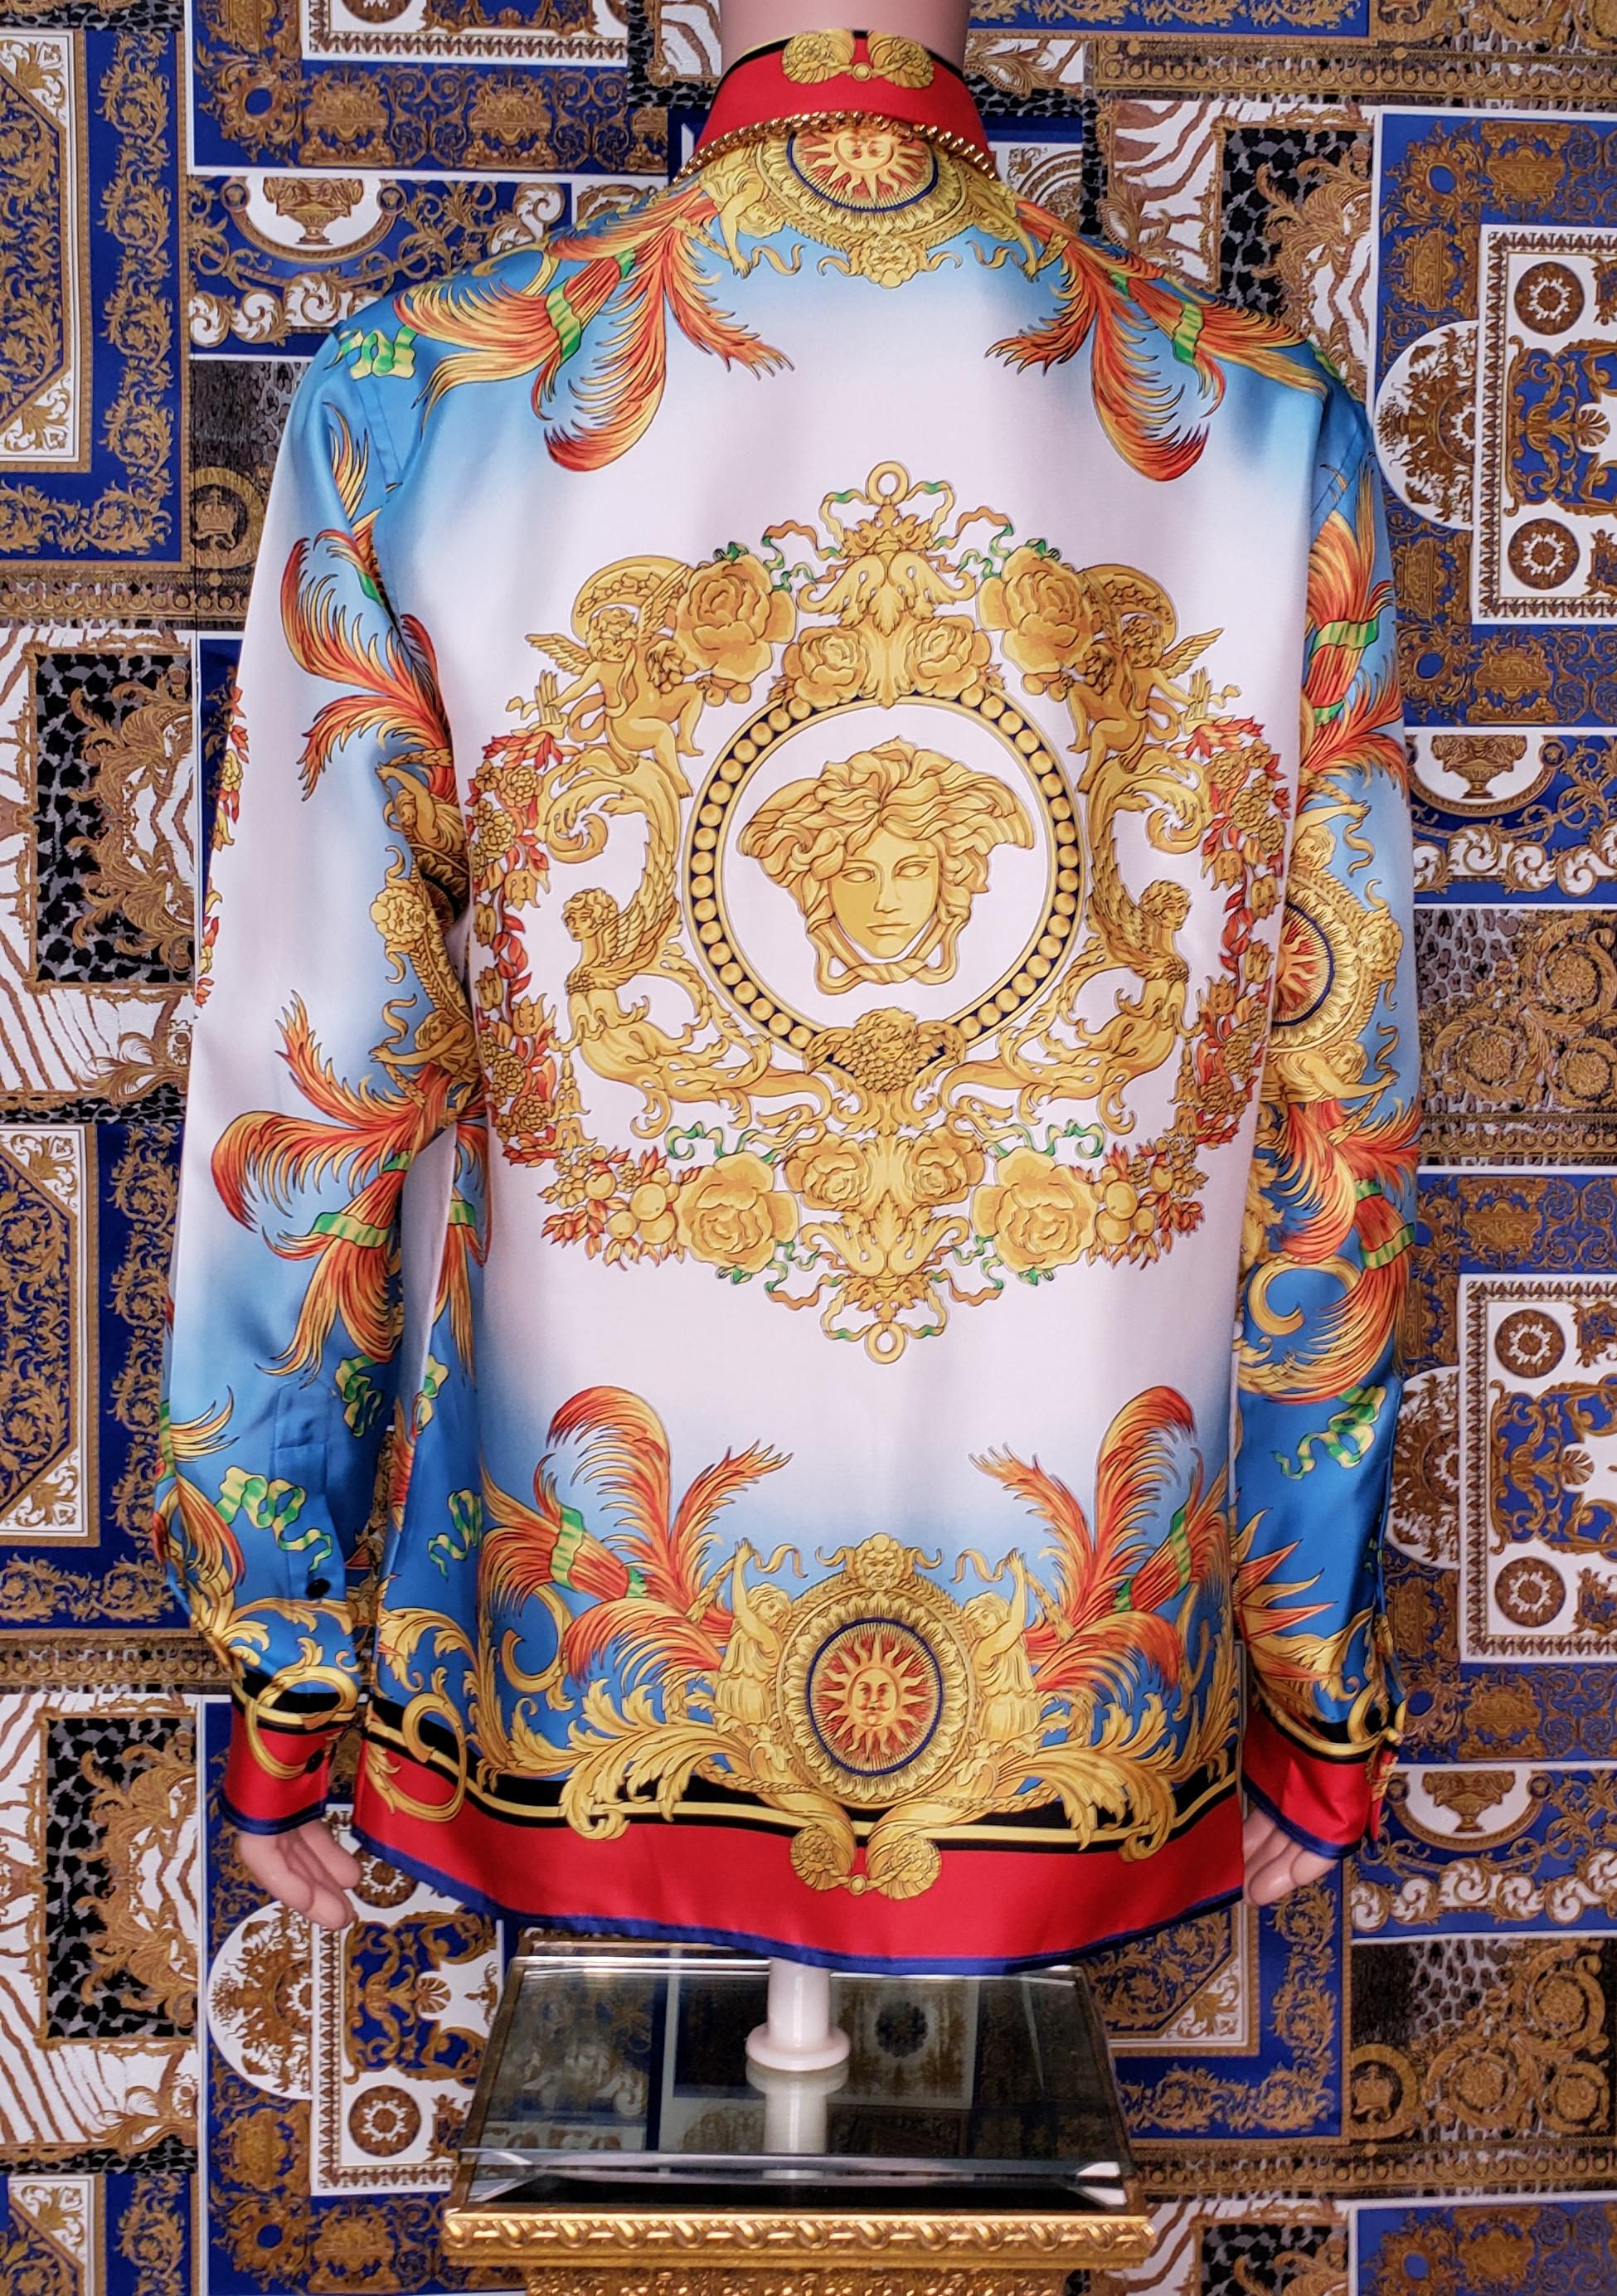 Brown NEW VERSACE MEDUSA BAROQUE PRINTED 100% SILK GOLD/BLUE/RED/WHITE SHIRT It 50 - L